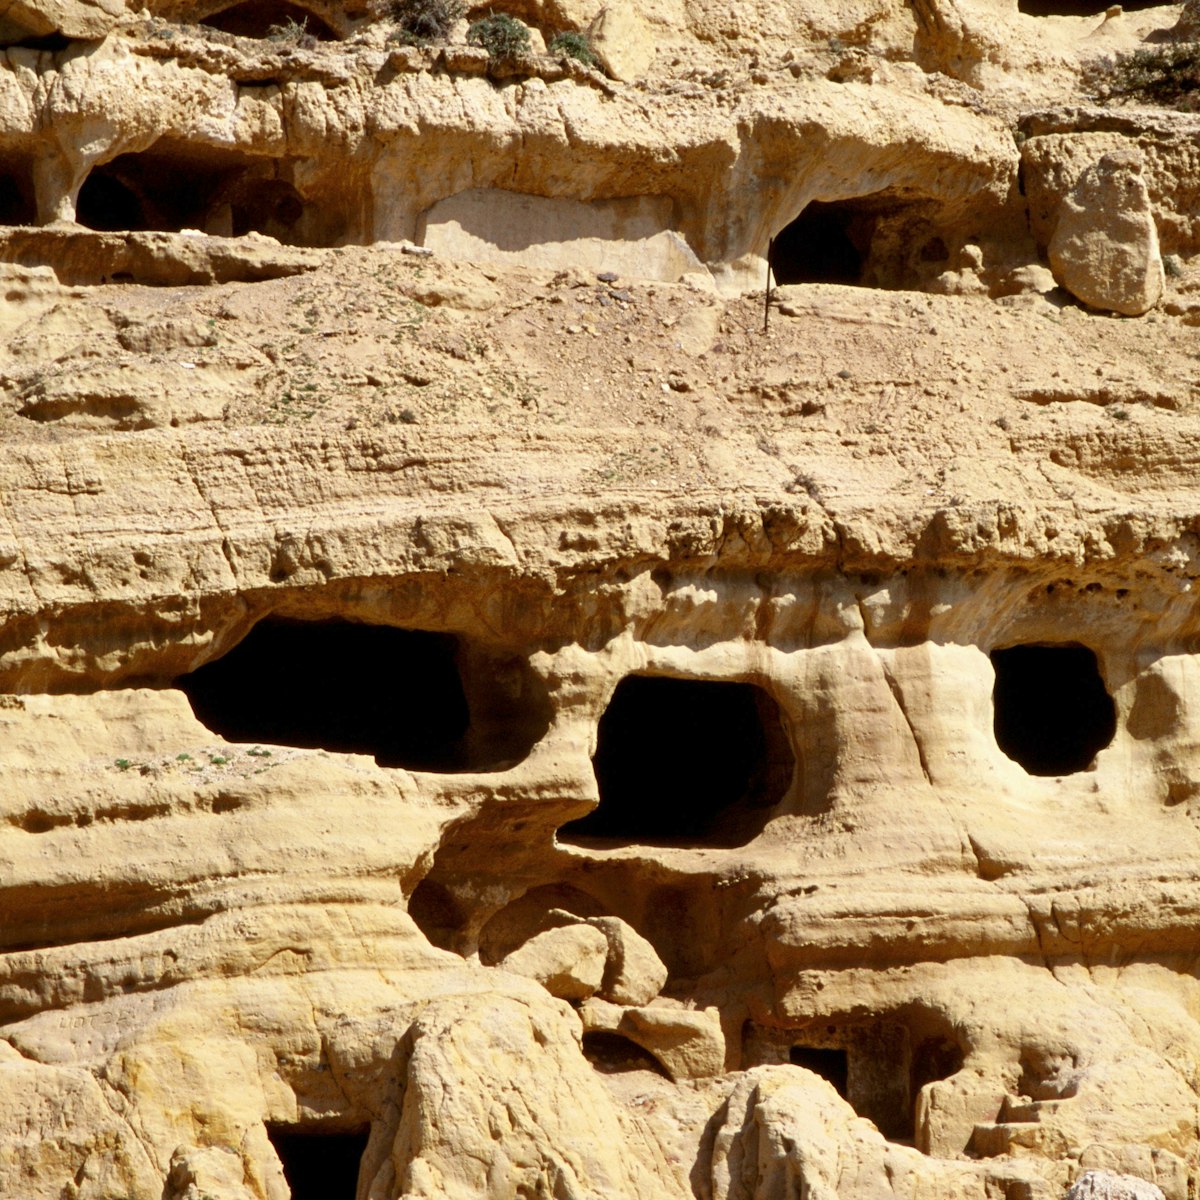 The caves in the matala cliffs started out as tombs but were used as troglodyte homes by hippies in recent years - Matala, Iraklio Province, Crete